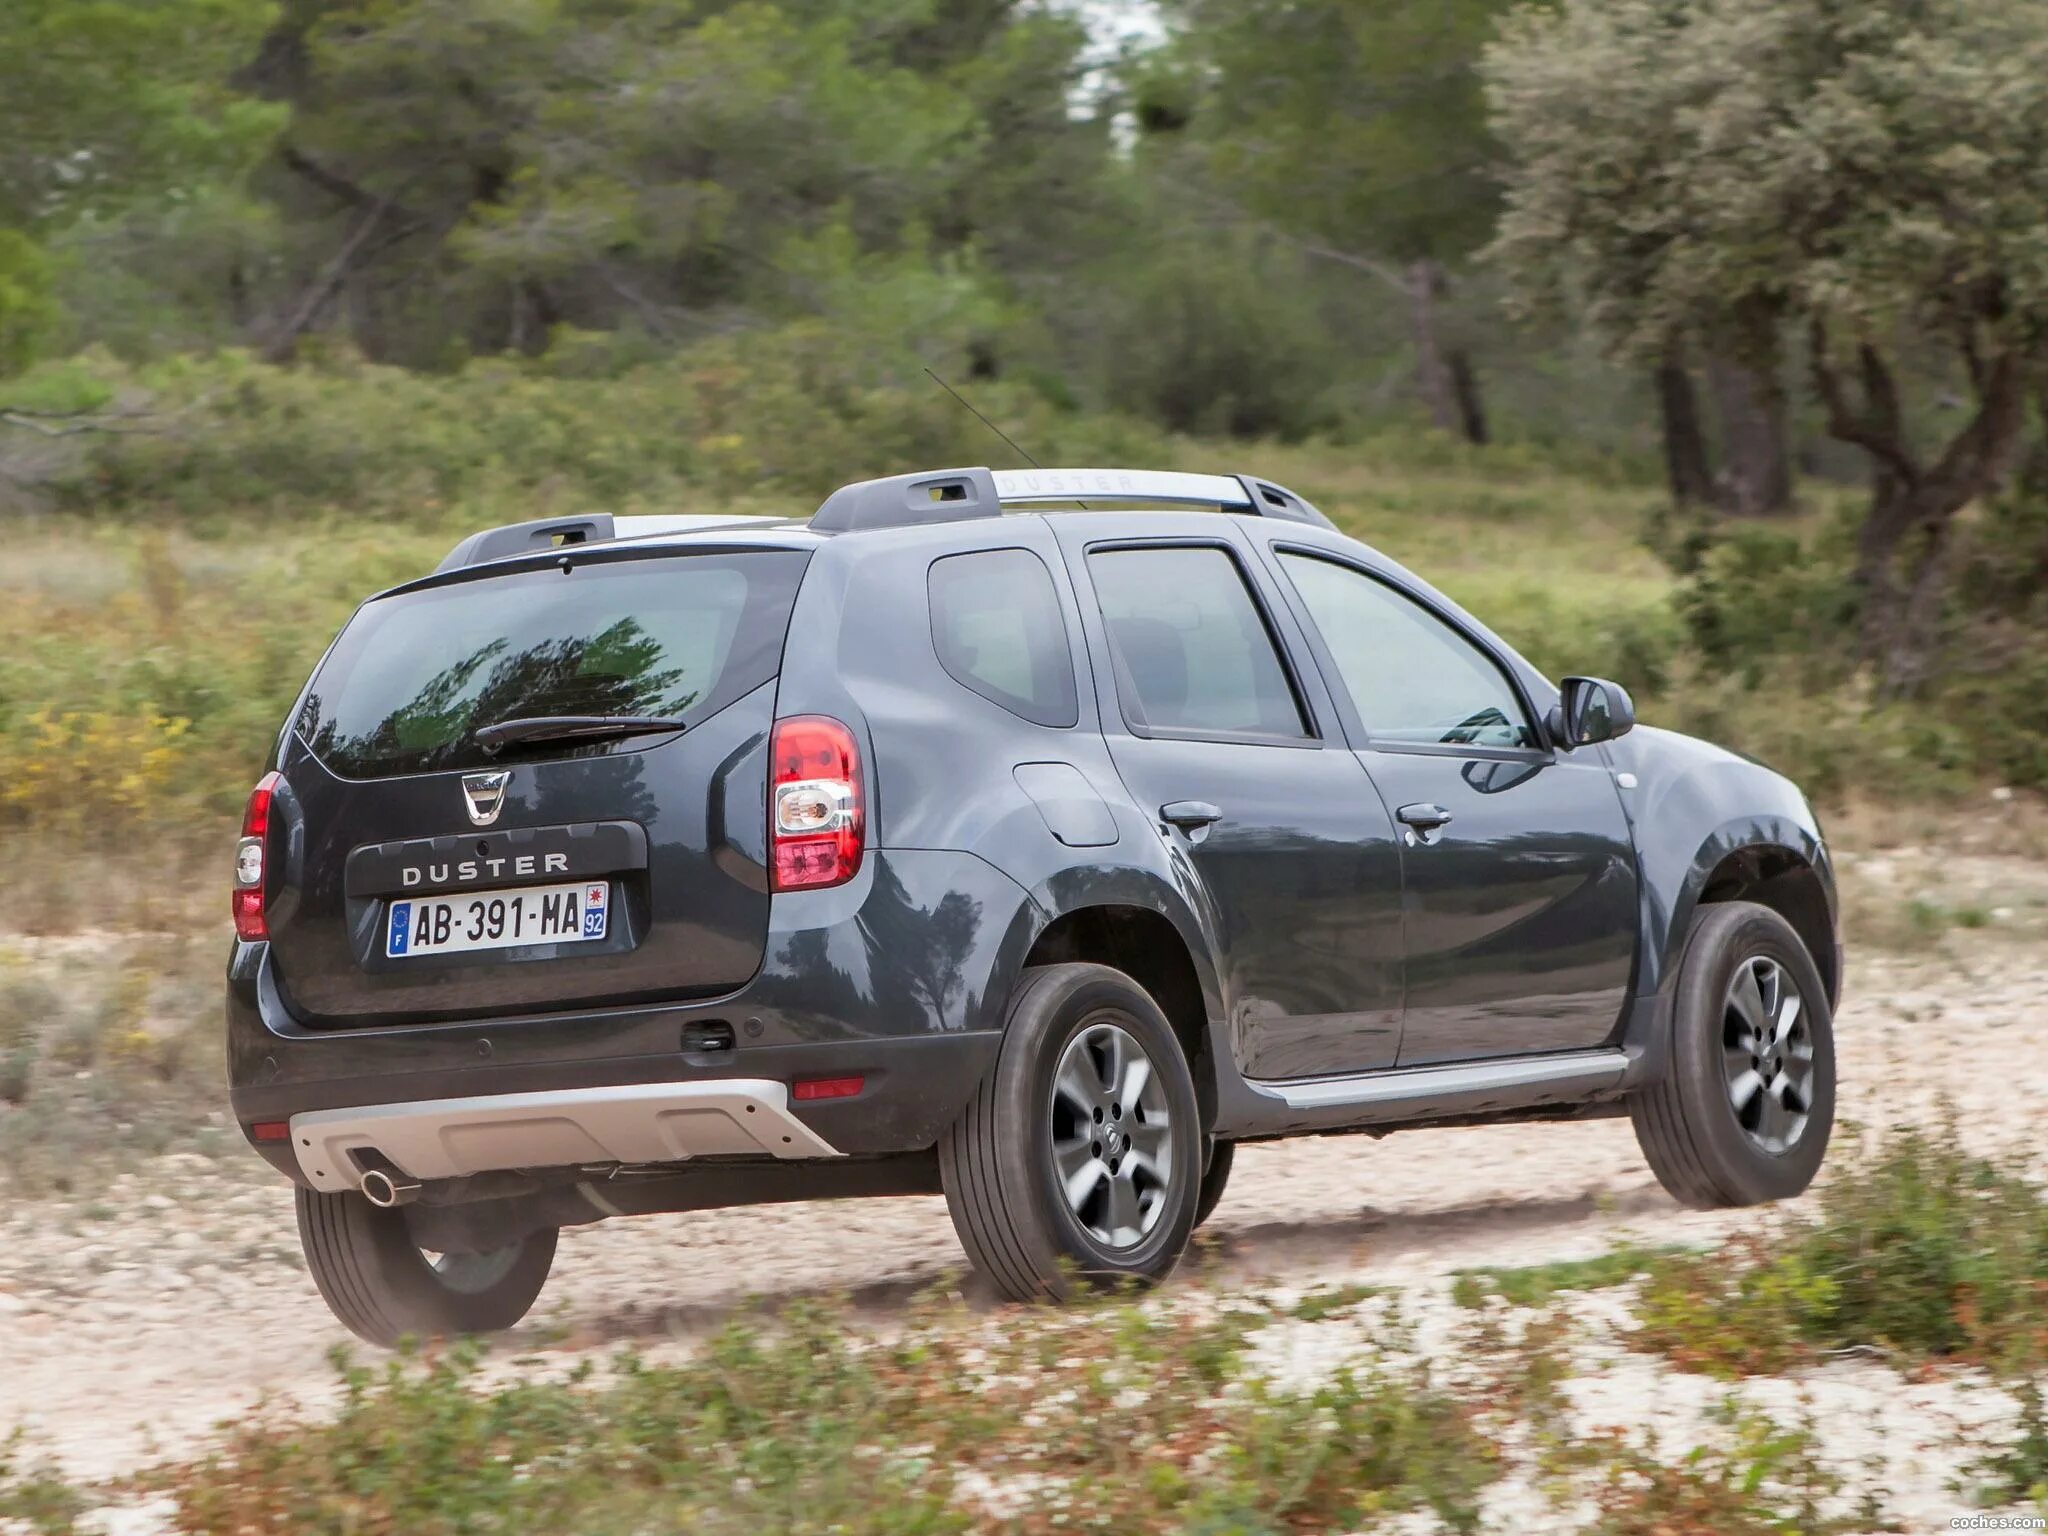 Renault Duster 2009. Рено Дастер 1. Renault Duster 2013. Renault Duster 2014. Купить дастер 2013г